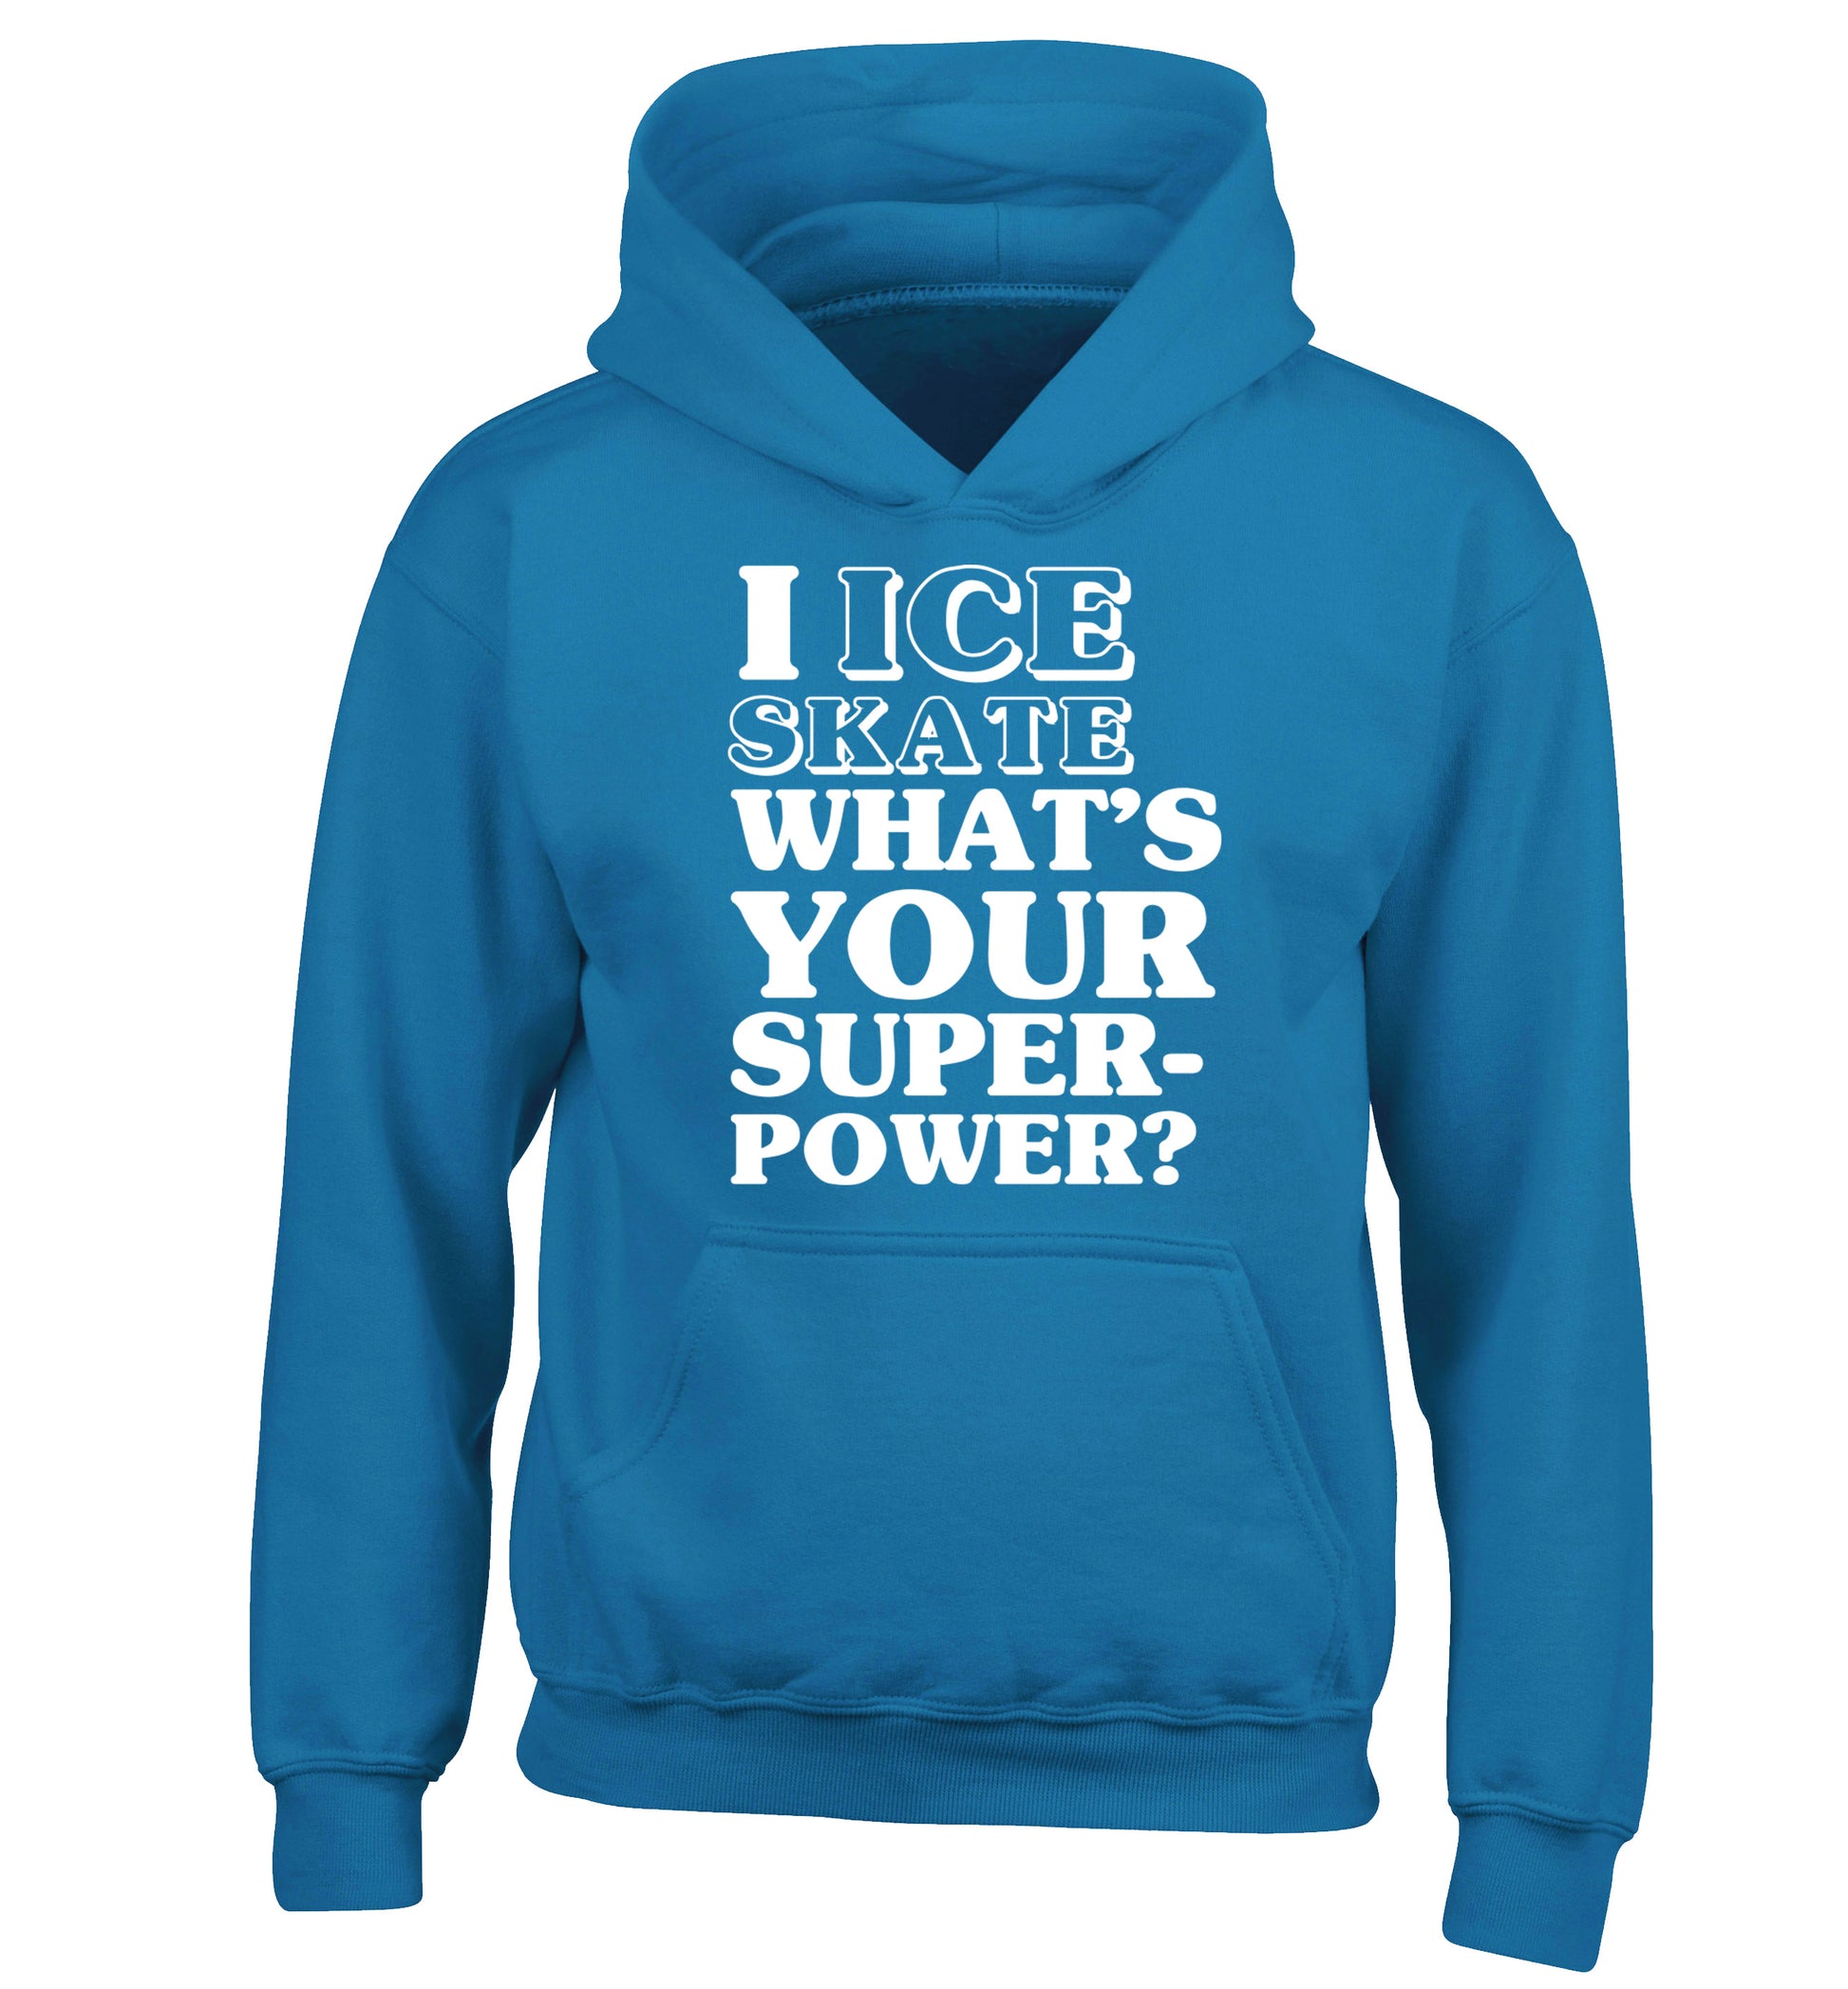 I ice skate what's your superpower? children's blue hoodie 12-14 Years